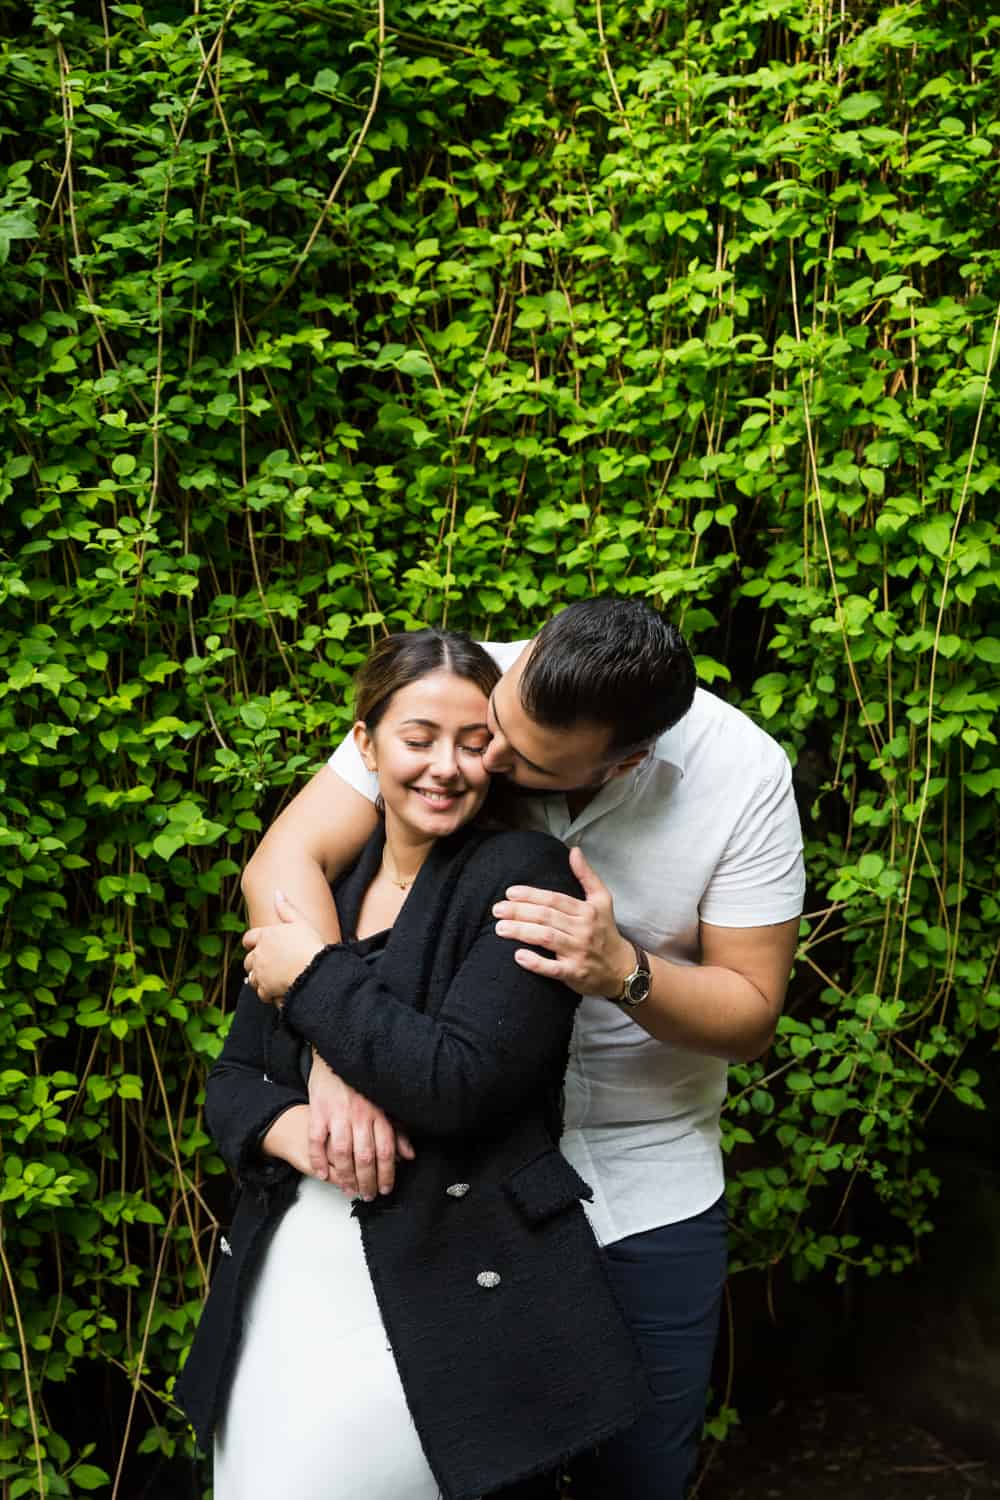 Man kissing woman's cheek in front of ivy-covered wall